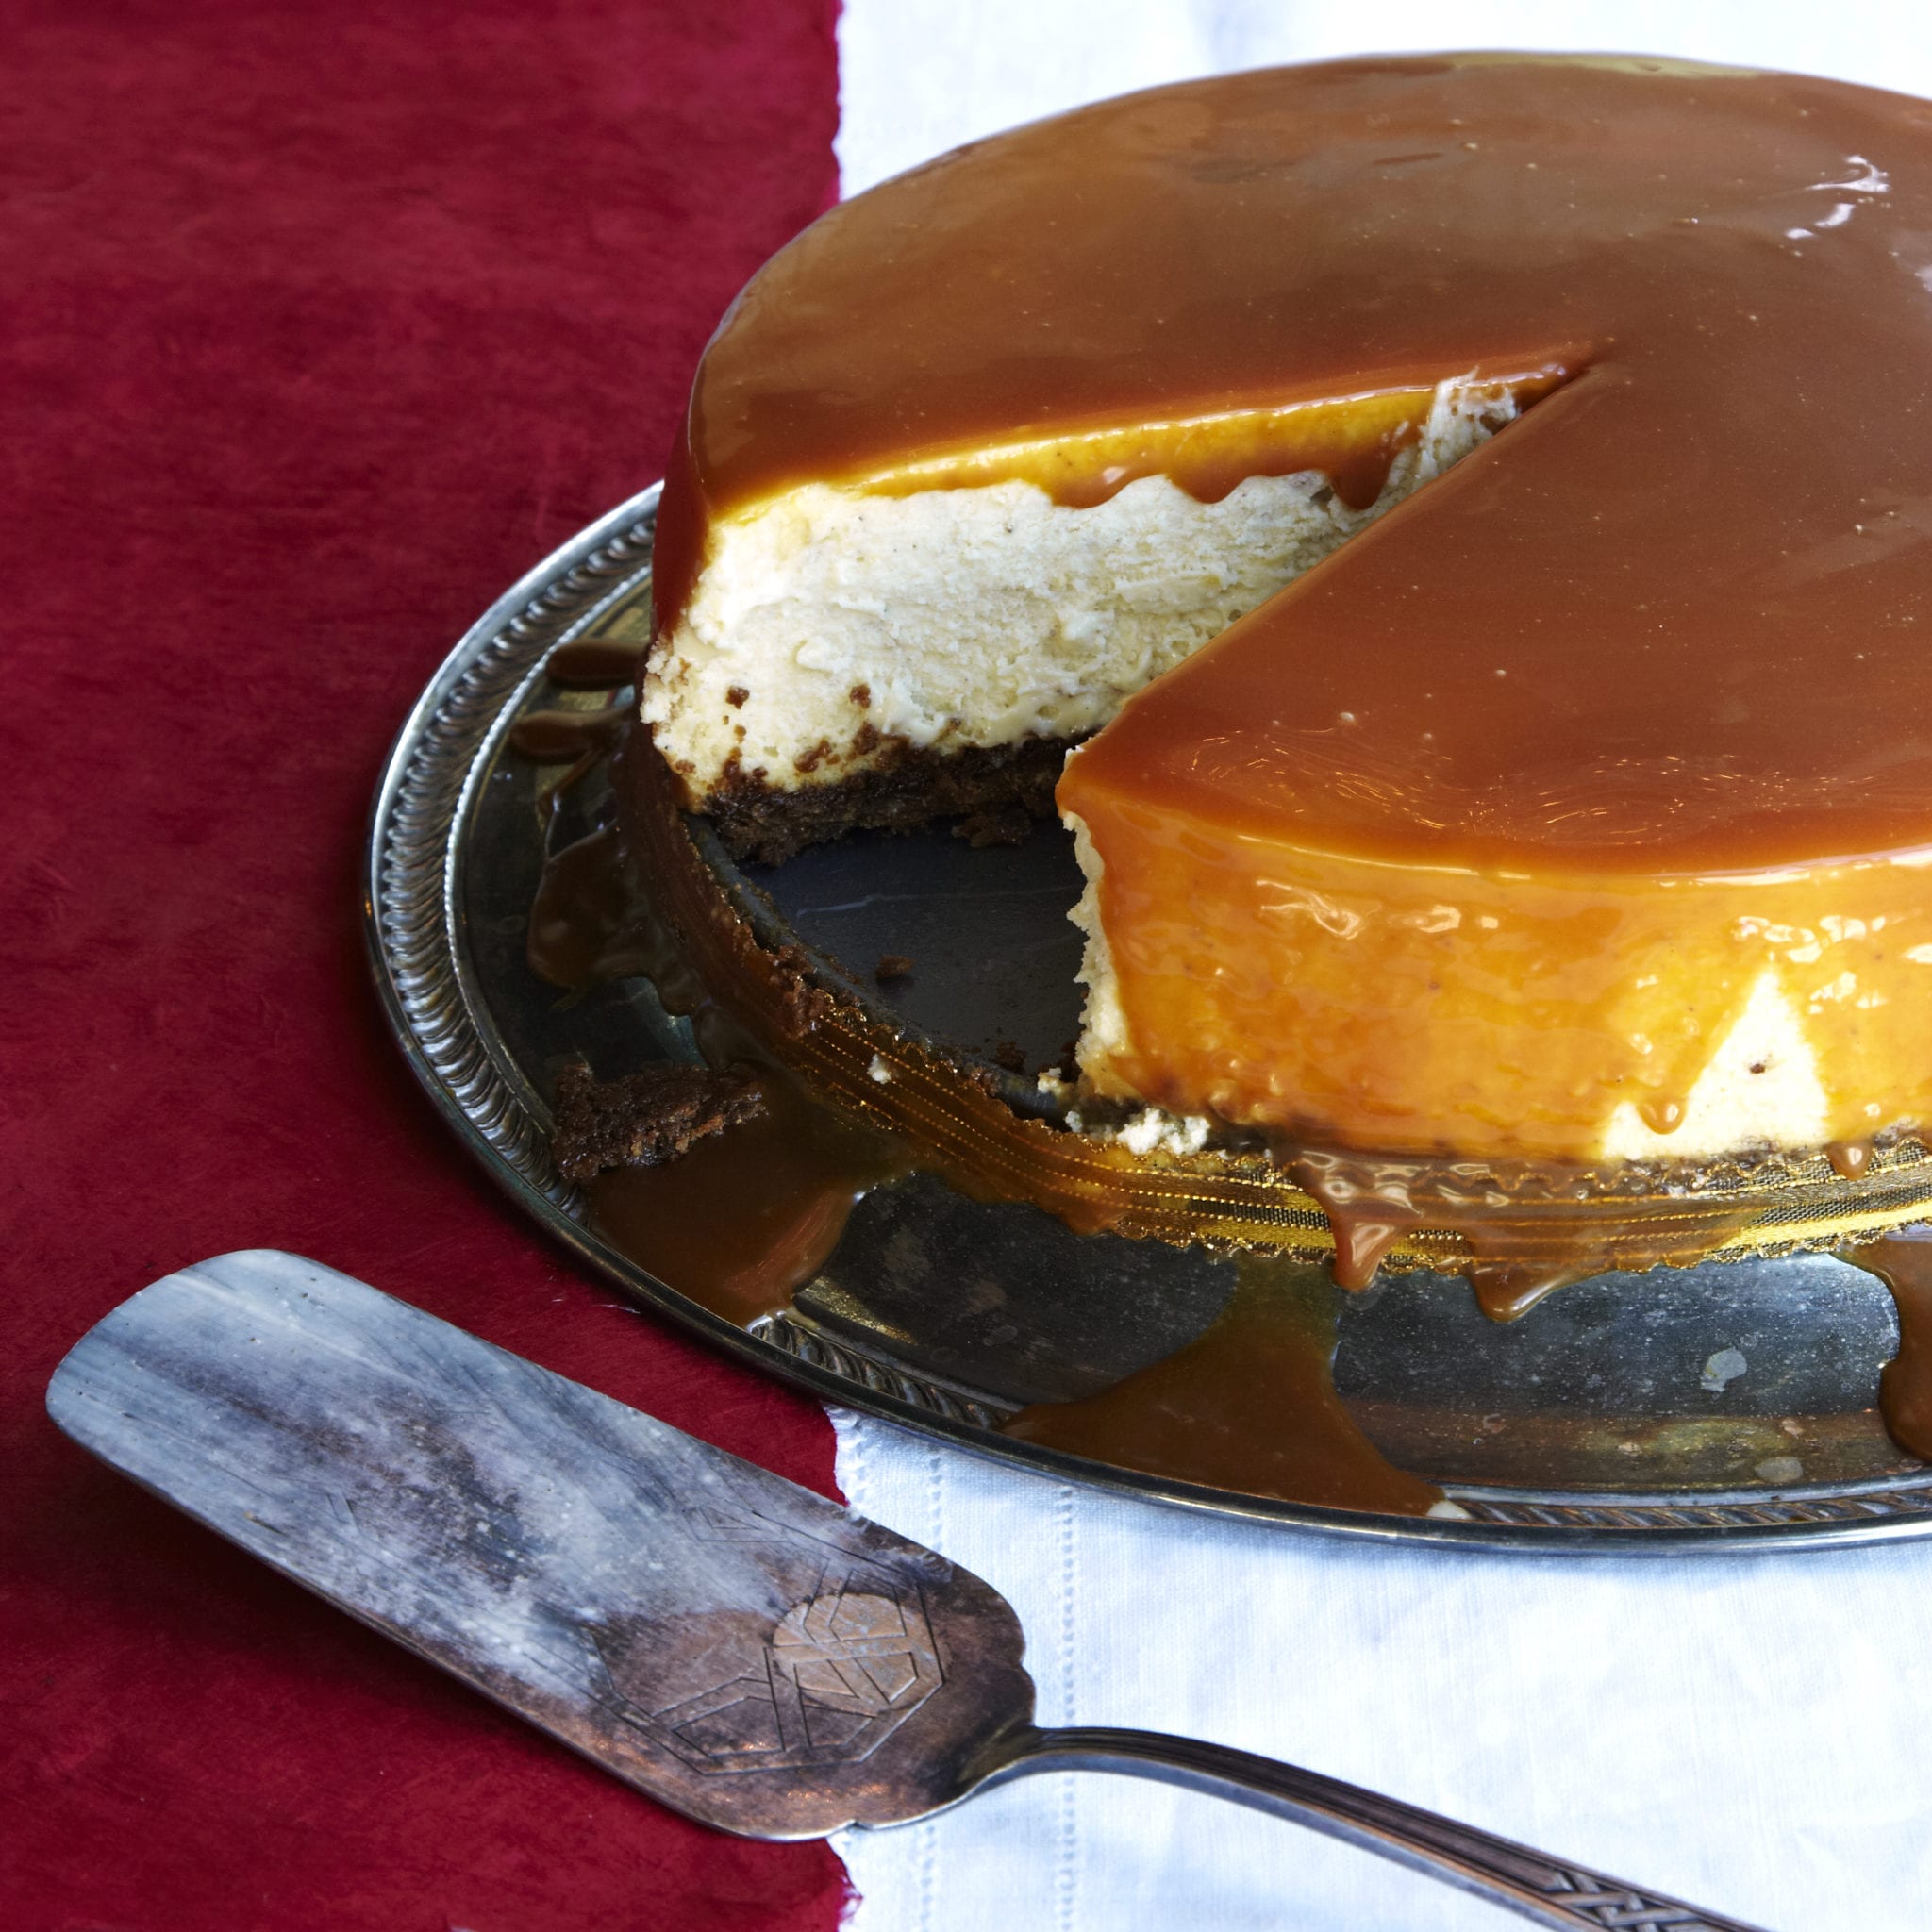 Bring the eggnog cheer with this eggnog cheesecake recipe drizzled with caramel sauce from Savannah's Back in the Day Bakery.